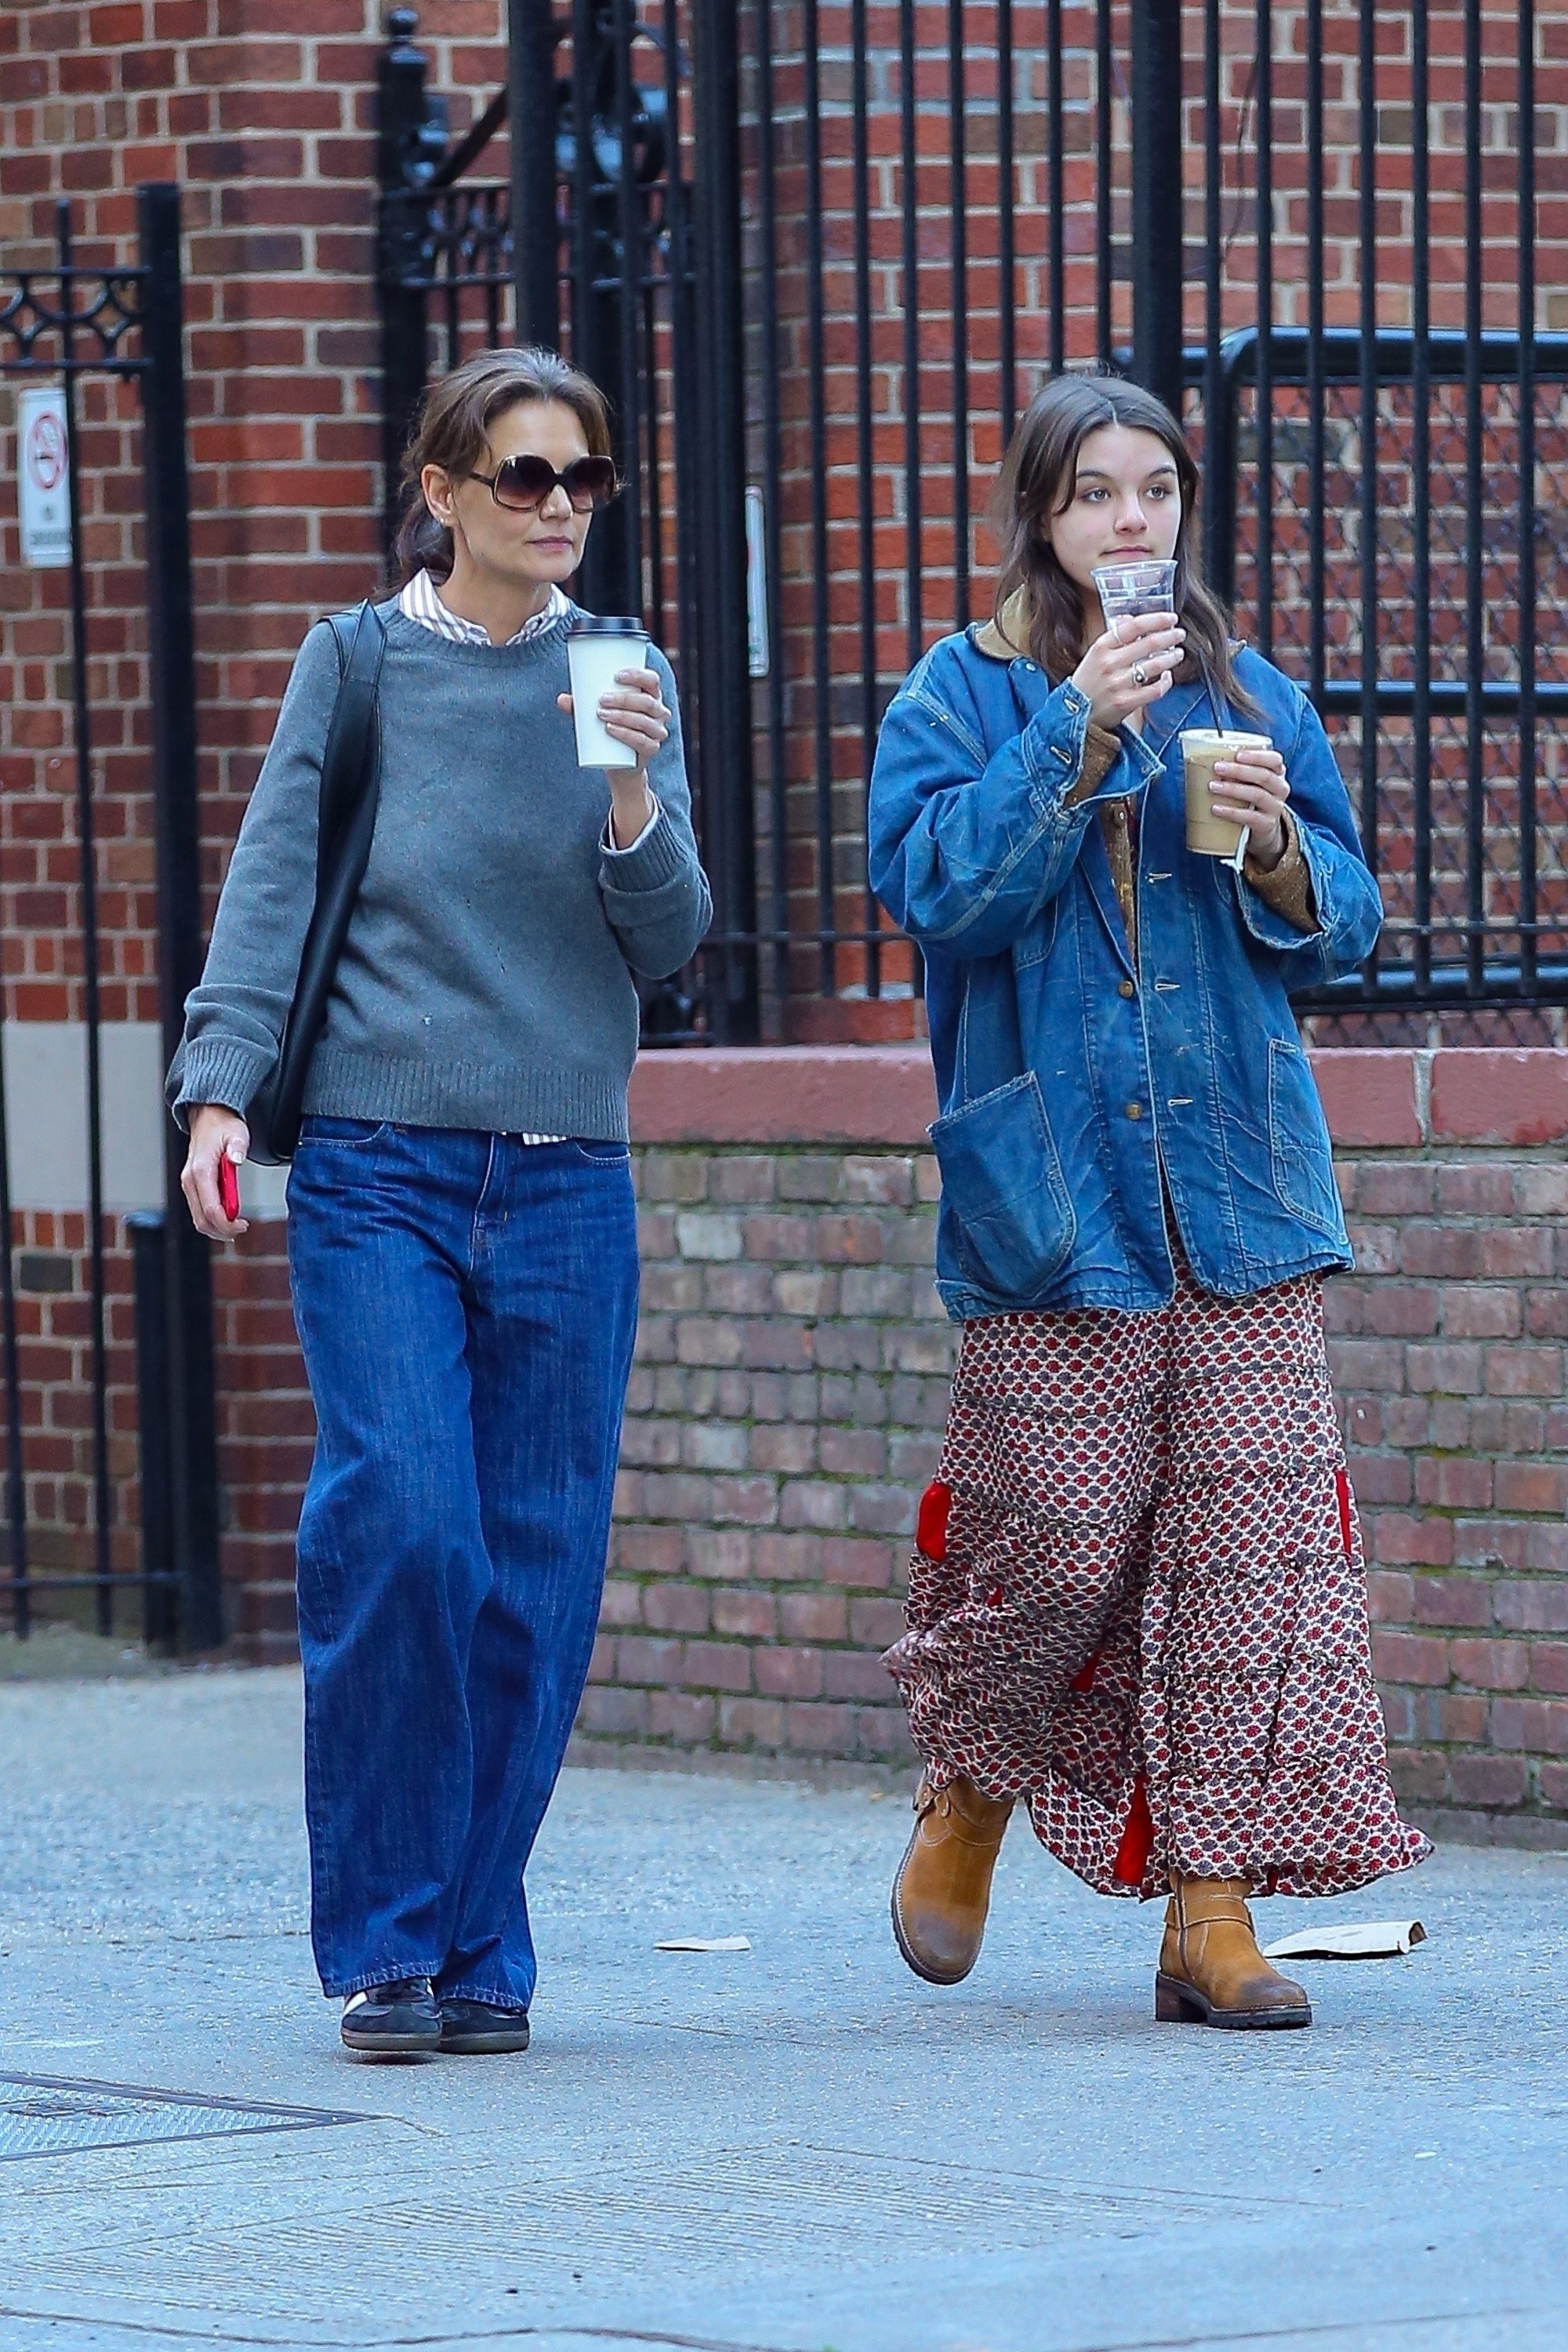 Katie Holmes and her daughter Suri Cruise on a stroll in New York